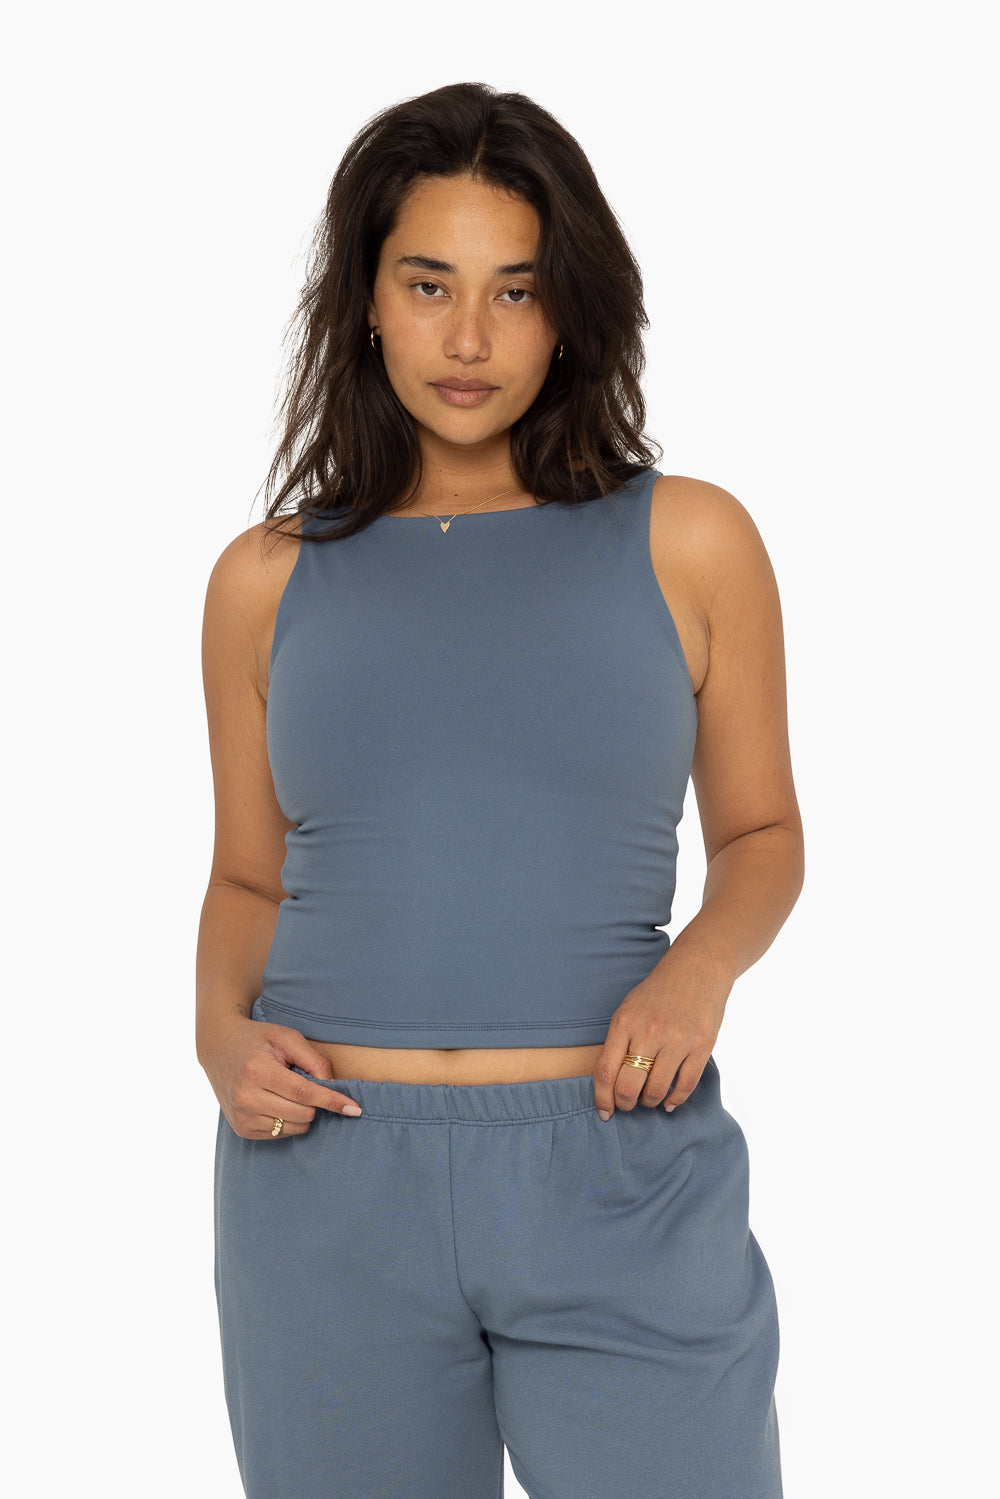 SET™ FORMCLOUD™ CITY TOP IN MINERAL